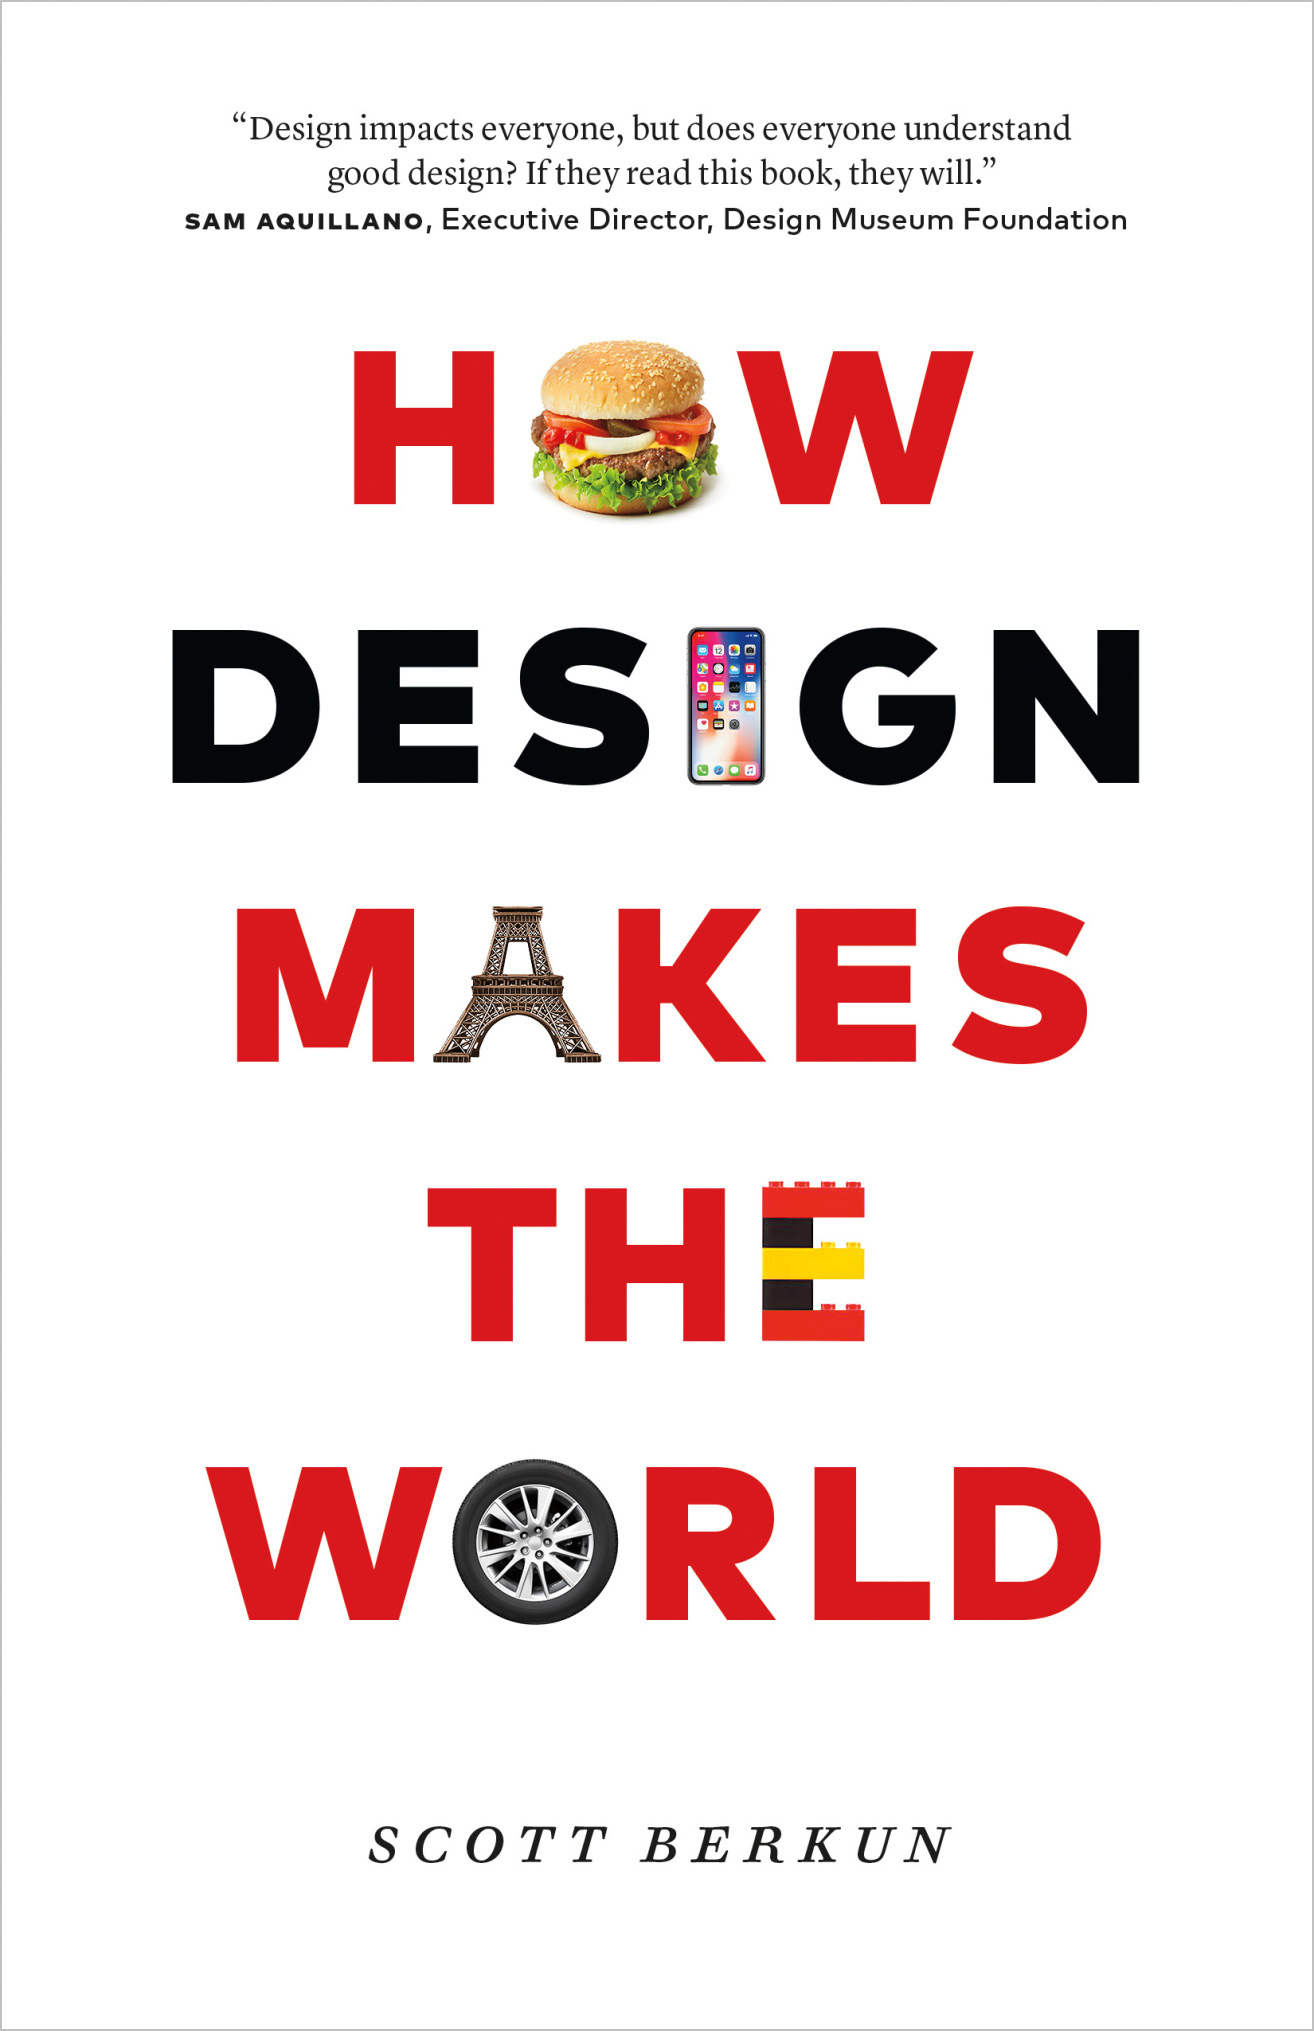 Cover for “How Design Makes the World”